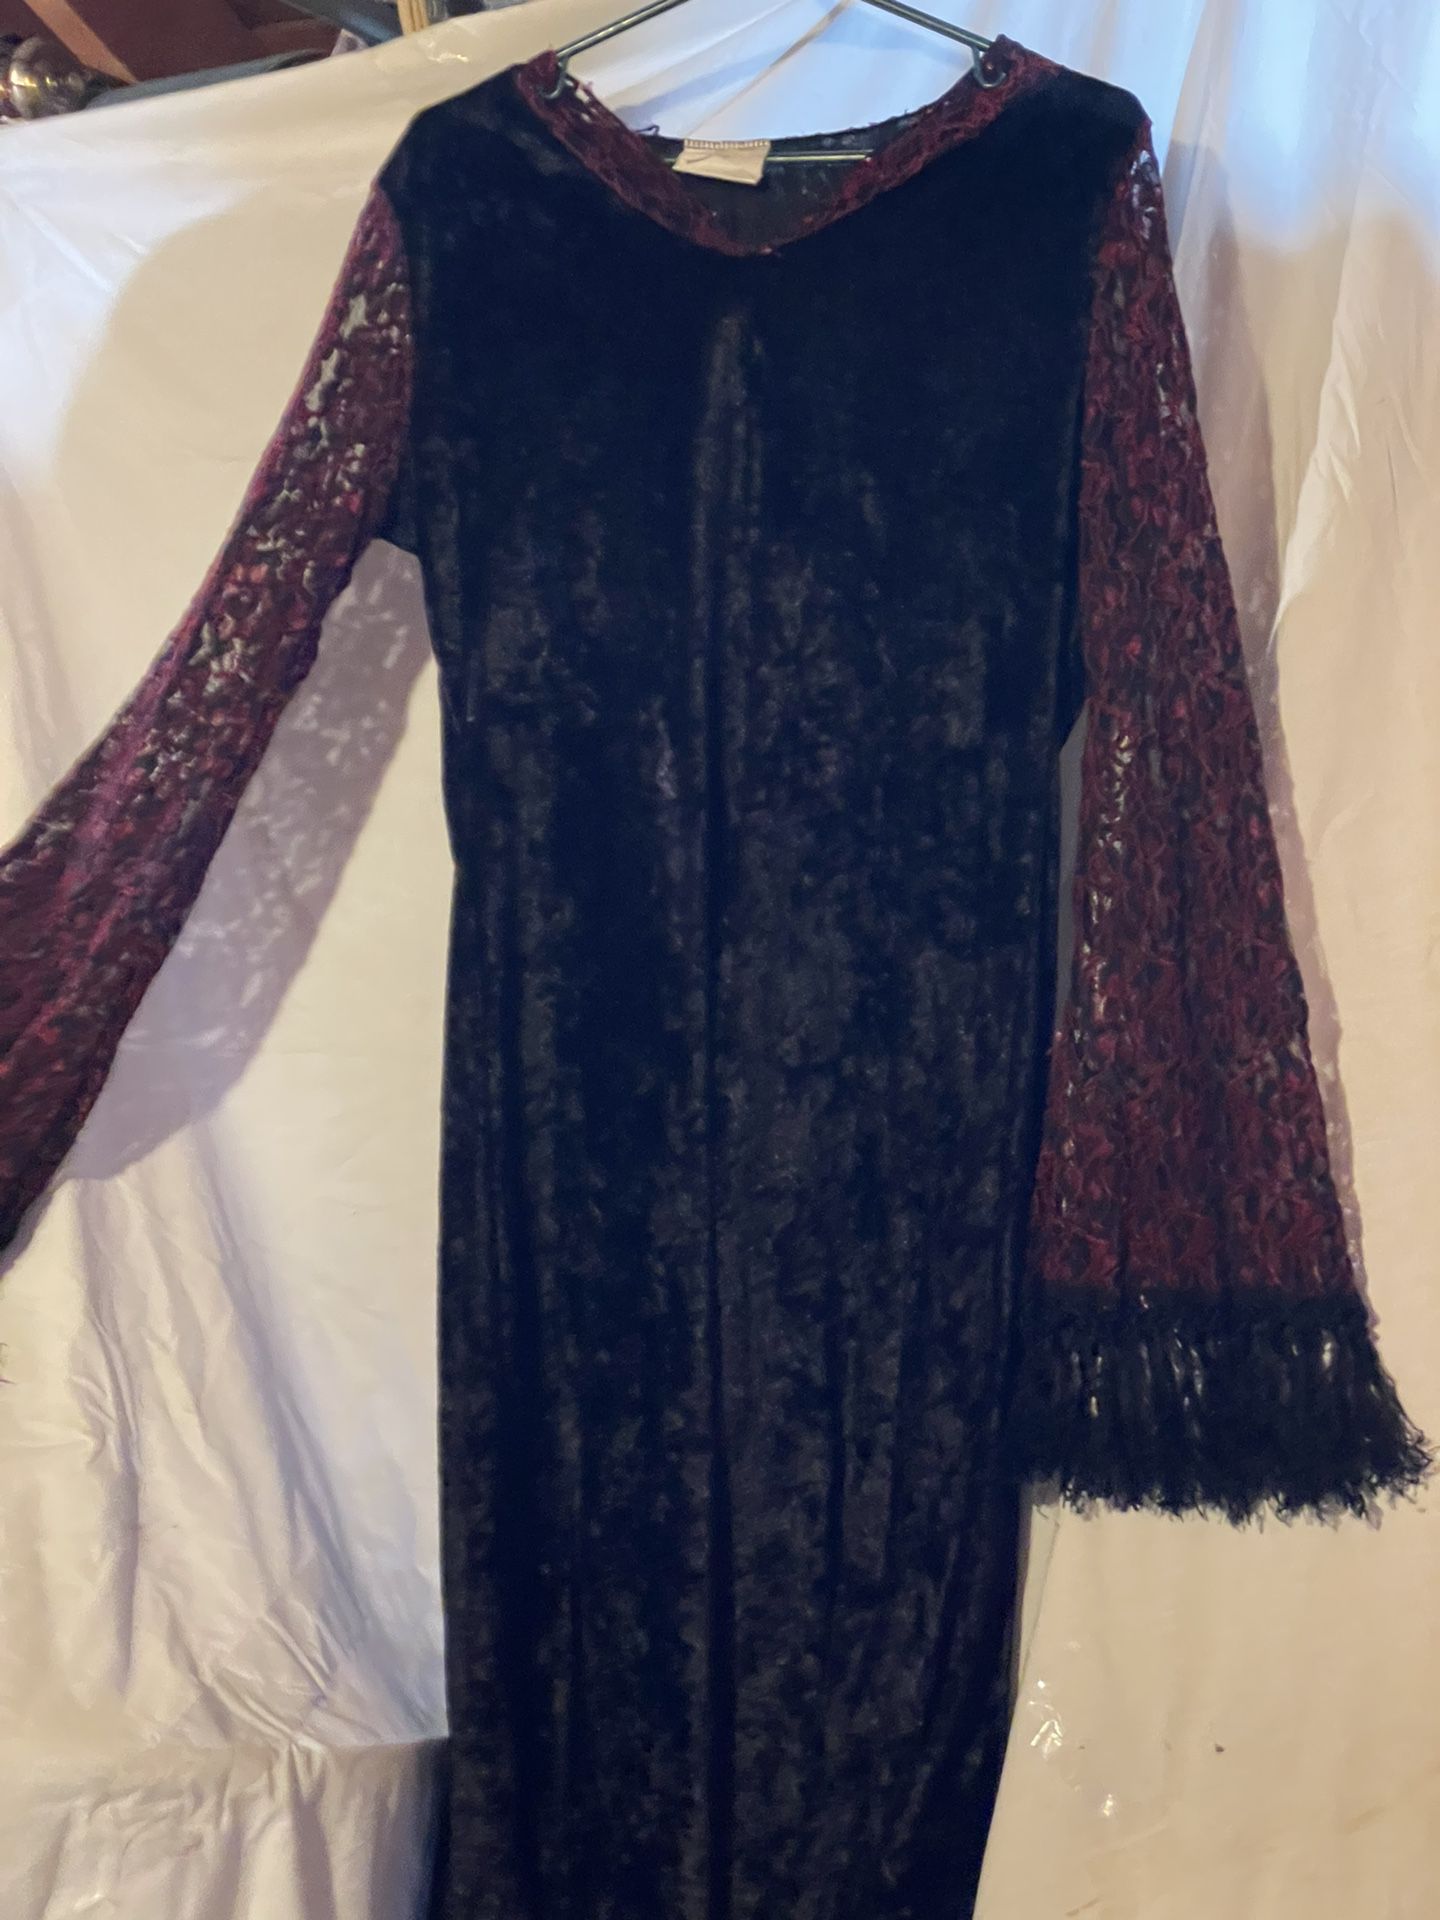 Woman’s Witchy Robe W/hood Costume 